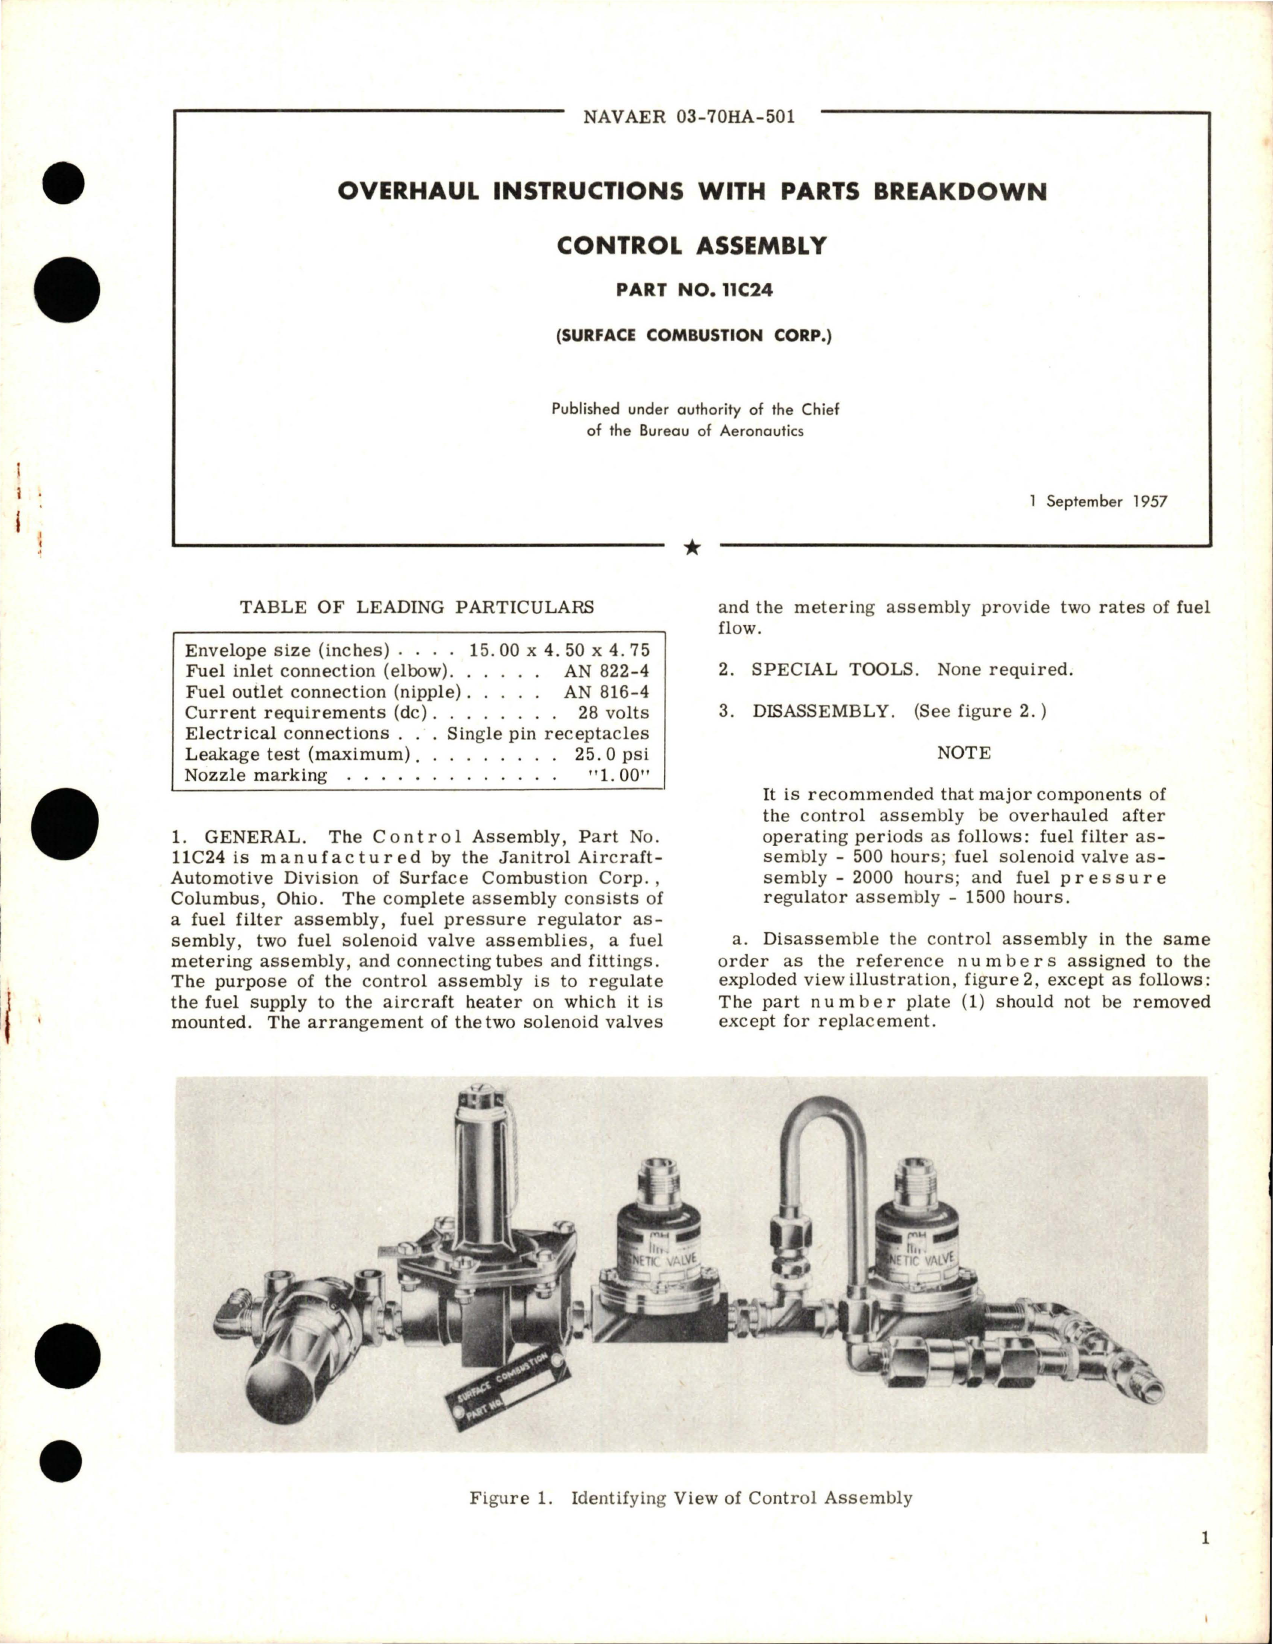 Sample page 1 from AirCorps Library document: Overhaul Instructions with Parts Breakdown for Control Assembly - Part 11C24 